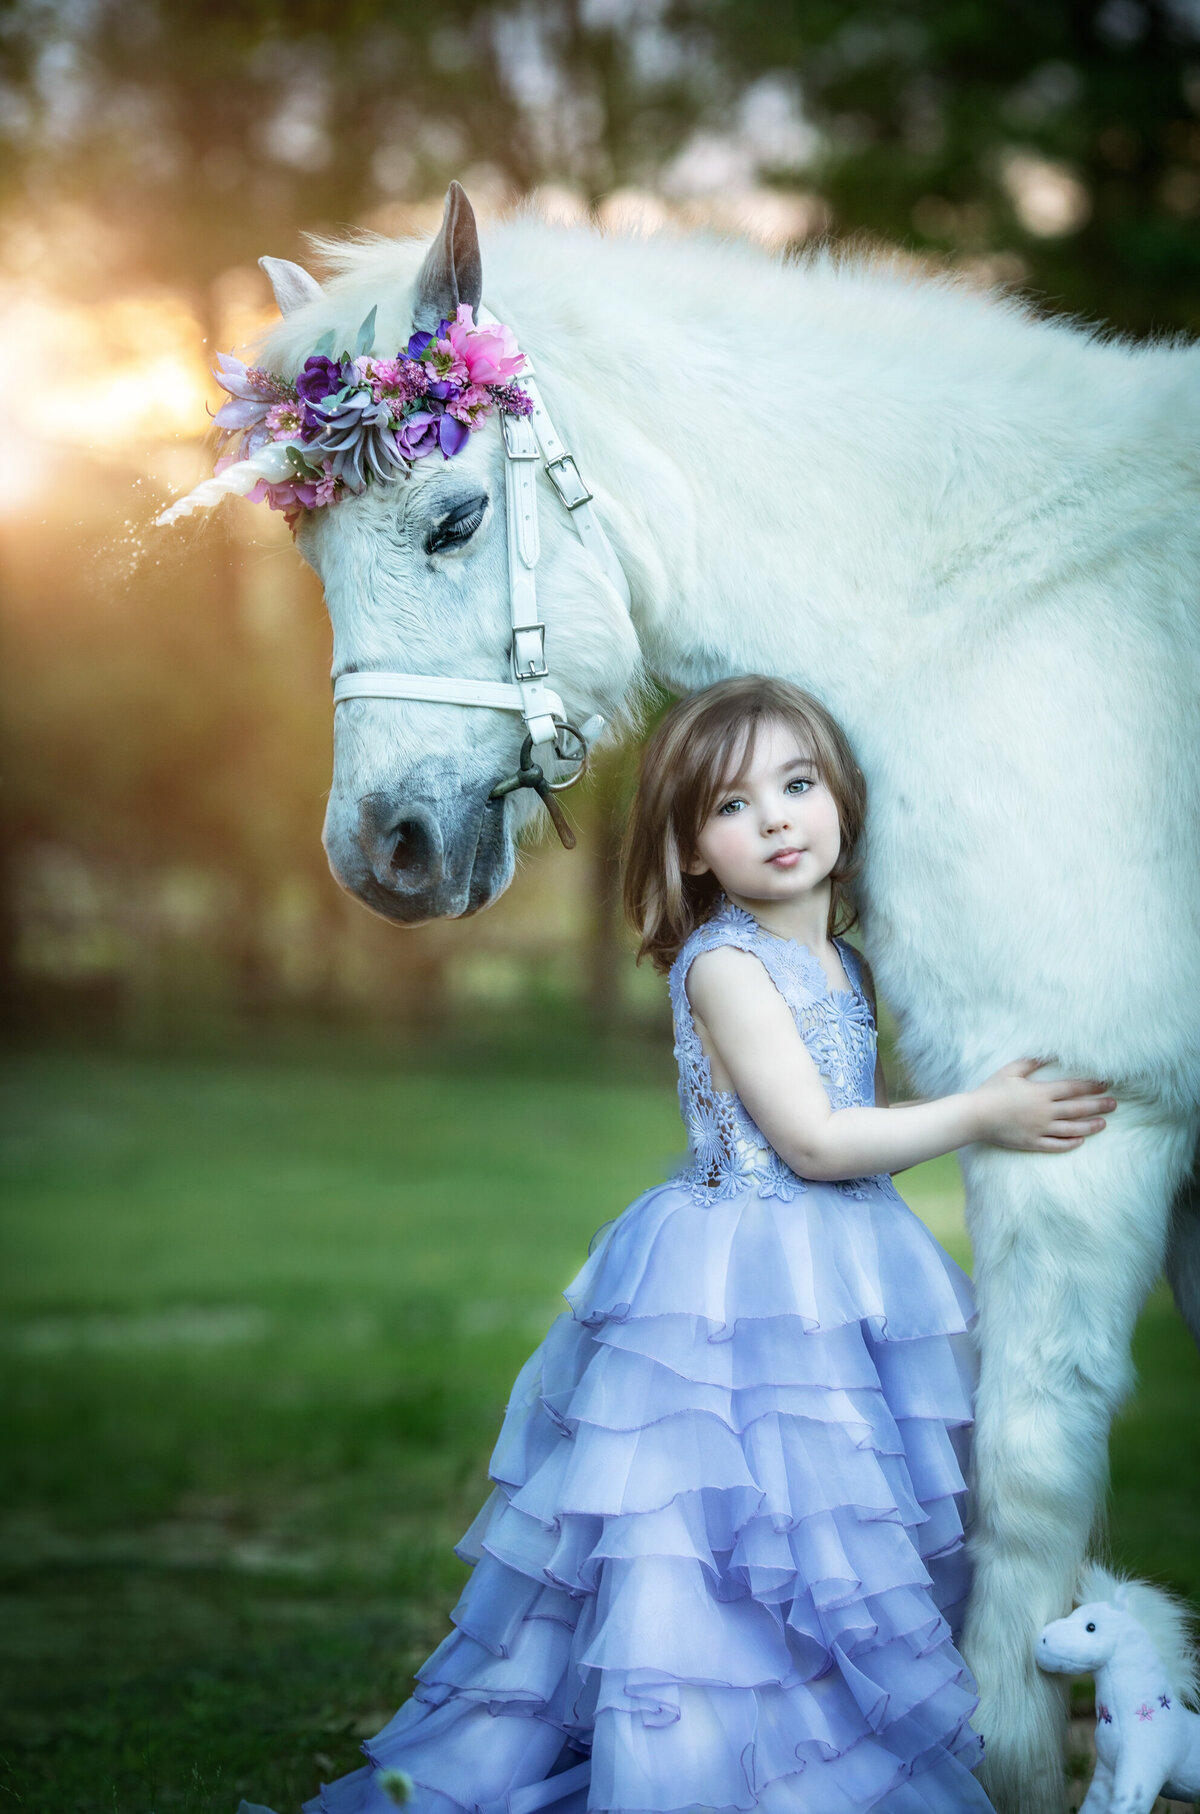 Girl in periwinkle dress by Butterfly Closet with shoulder length brown hair.  She is hugging a Welsh pony with a unicorn horn.  The horse is white.  She is holding onto its leg and there is a stuffed unicorn on the bottom right of the image.